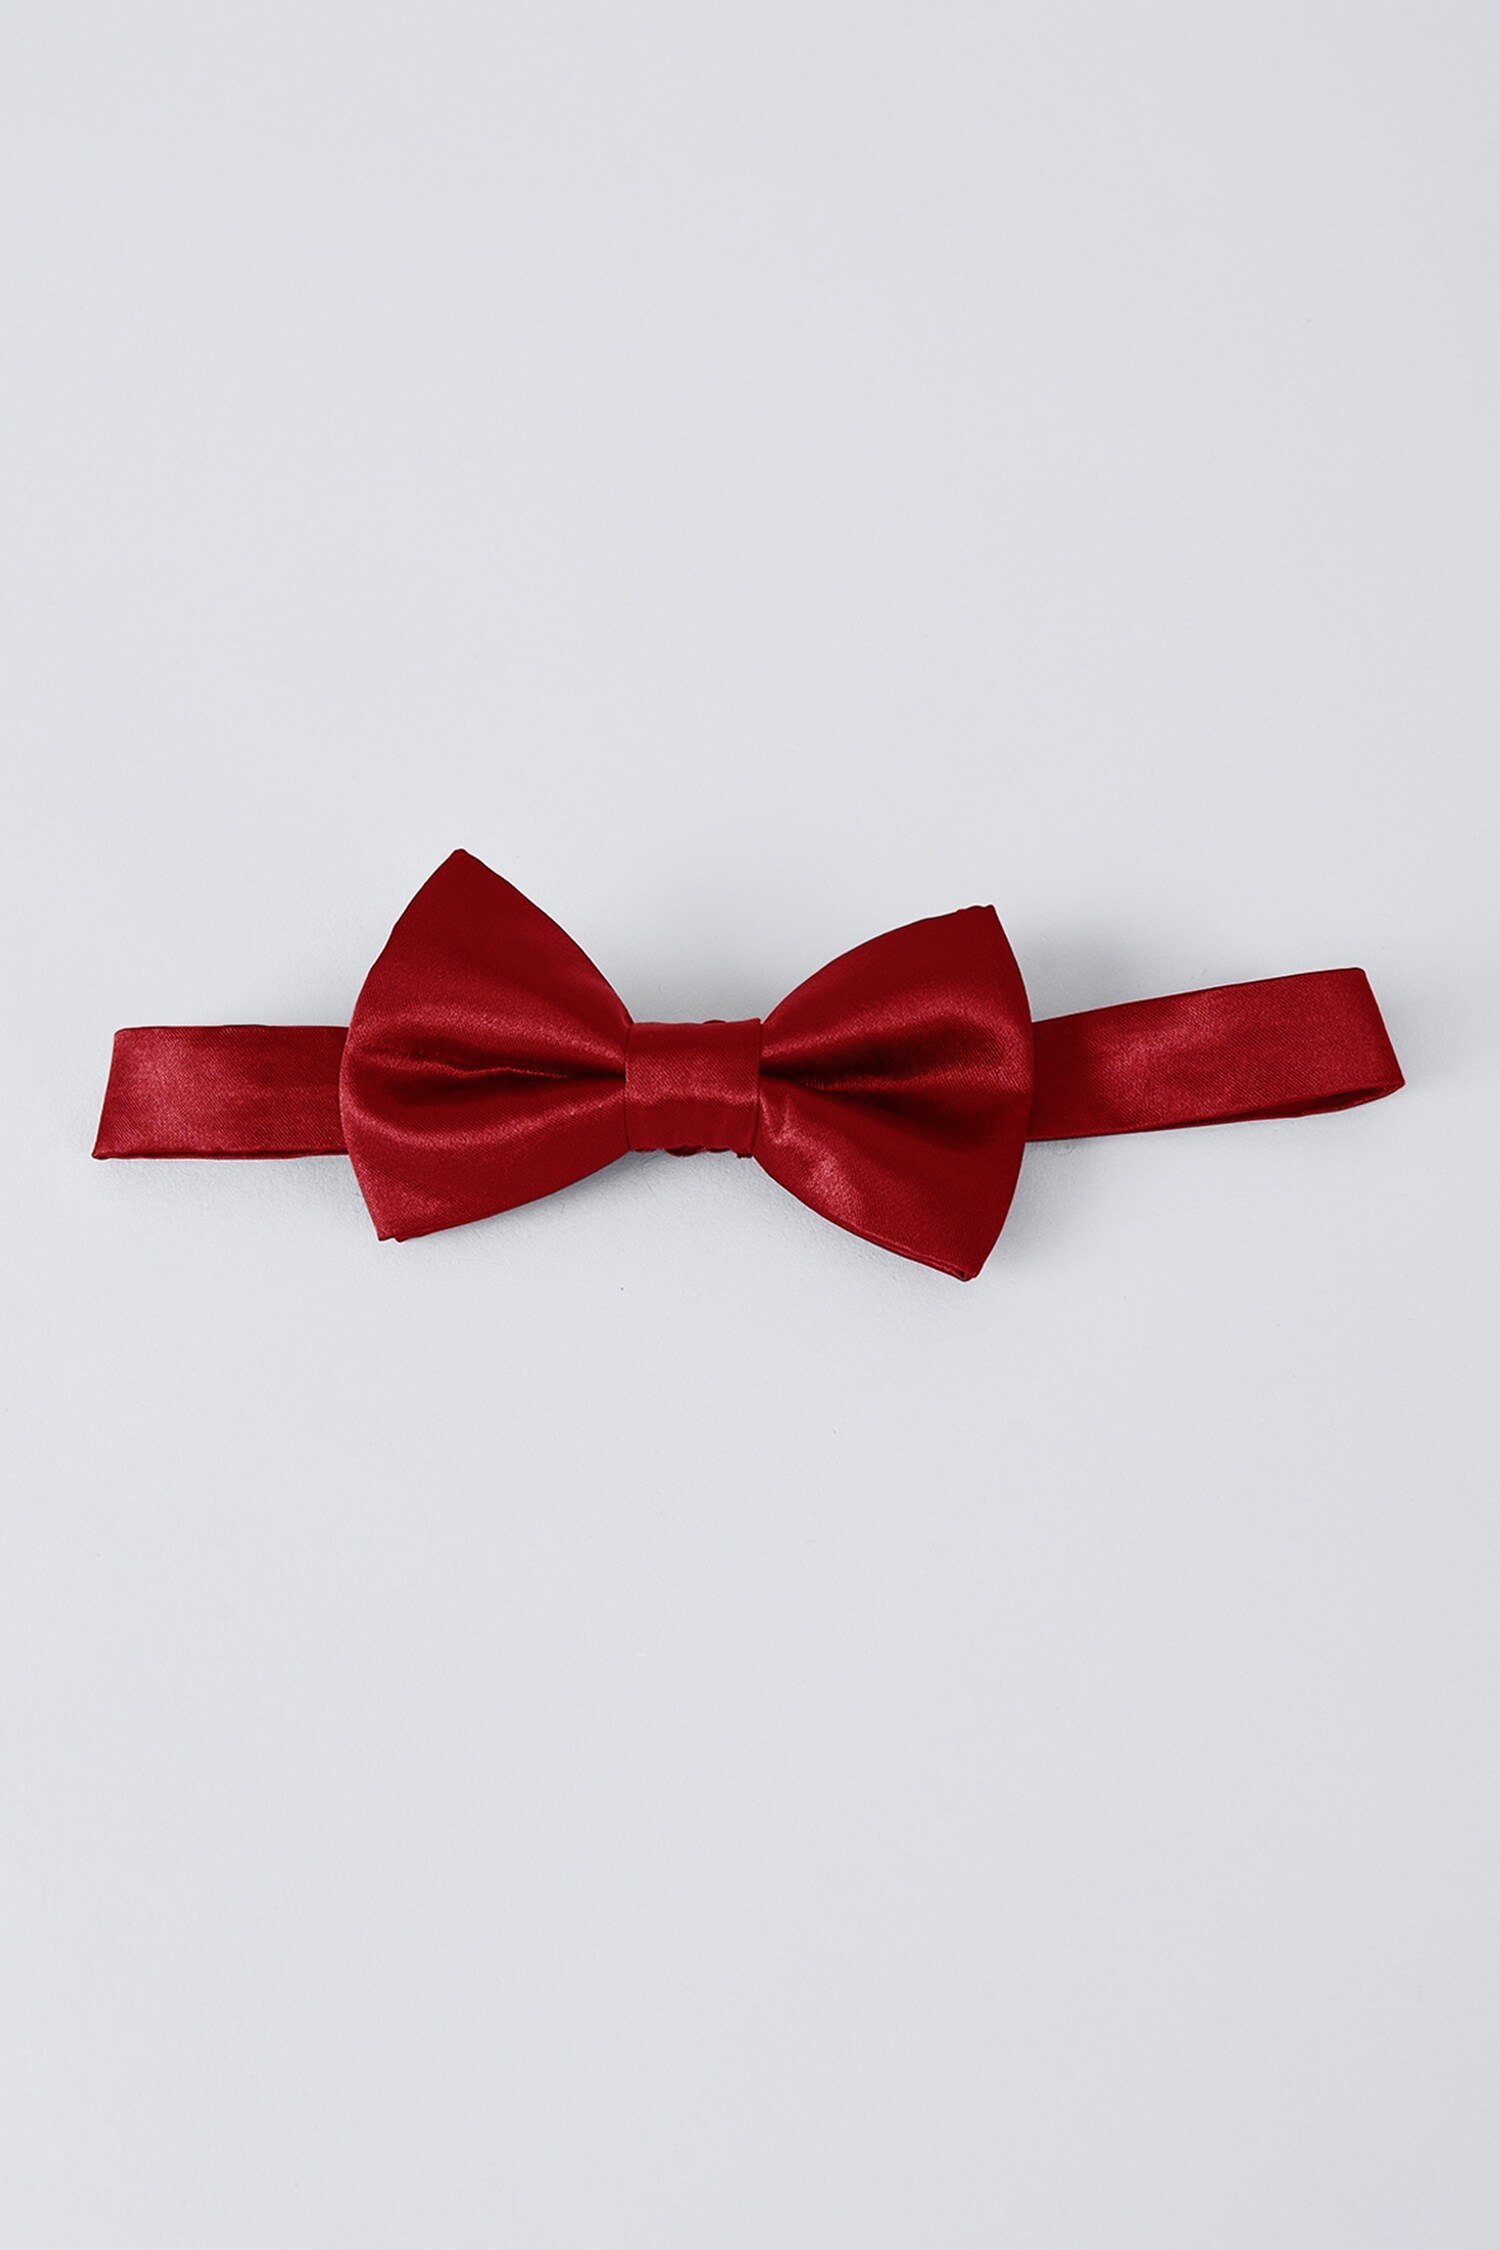 Bubber Couture Red Plain Scarlet Silk Bow Tie